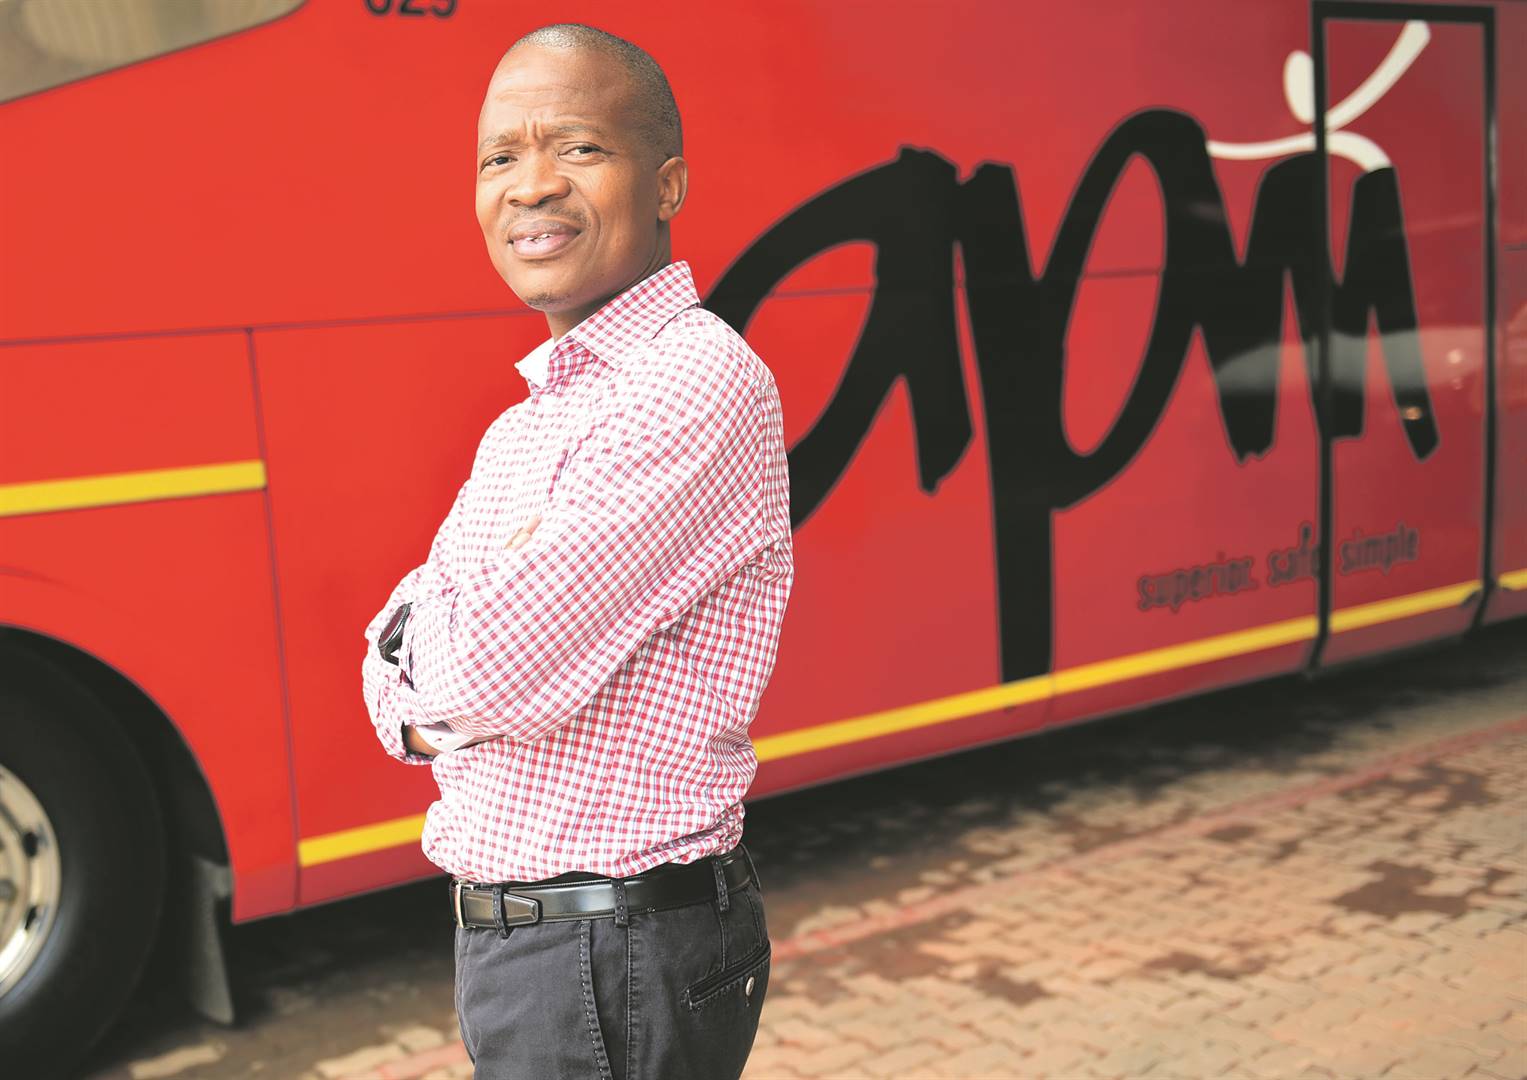 Tumisang Kgaboesele is the CEO of bus company Africa People Mover. Picture: Tebogo Letsie/City Press